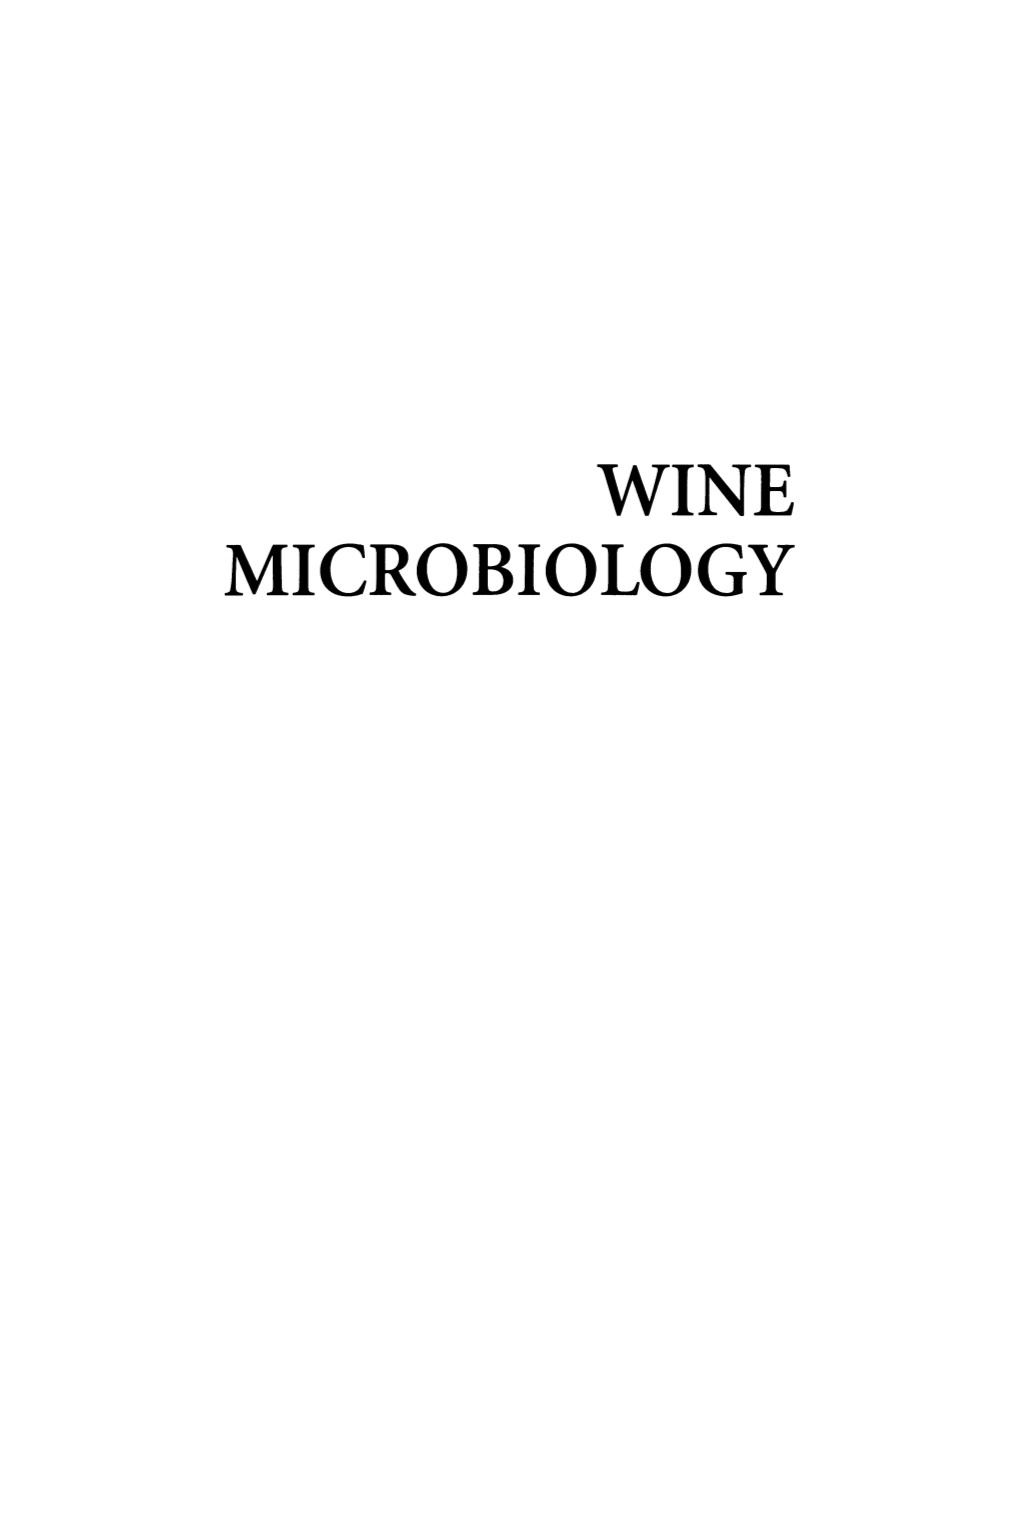 WINE MICROBIOLOGY the Chapman & Hall Enology Library